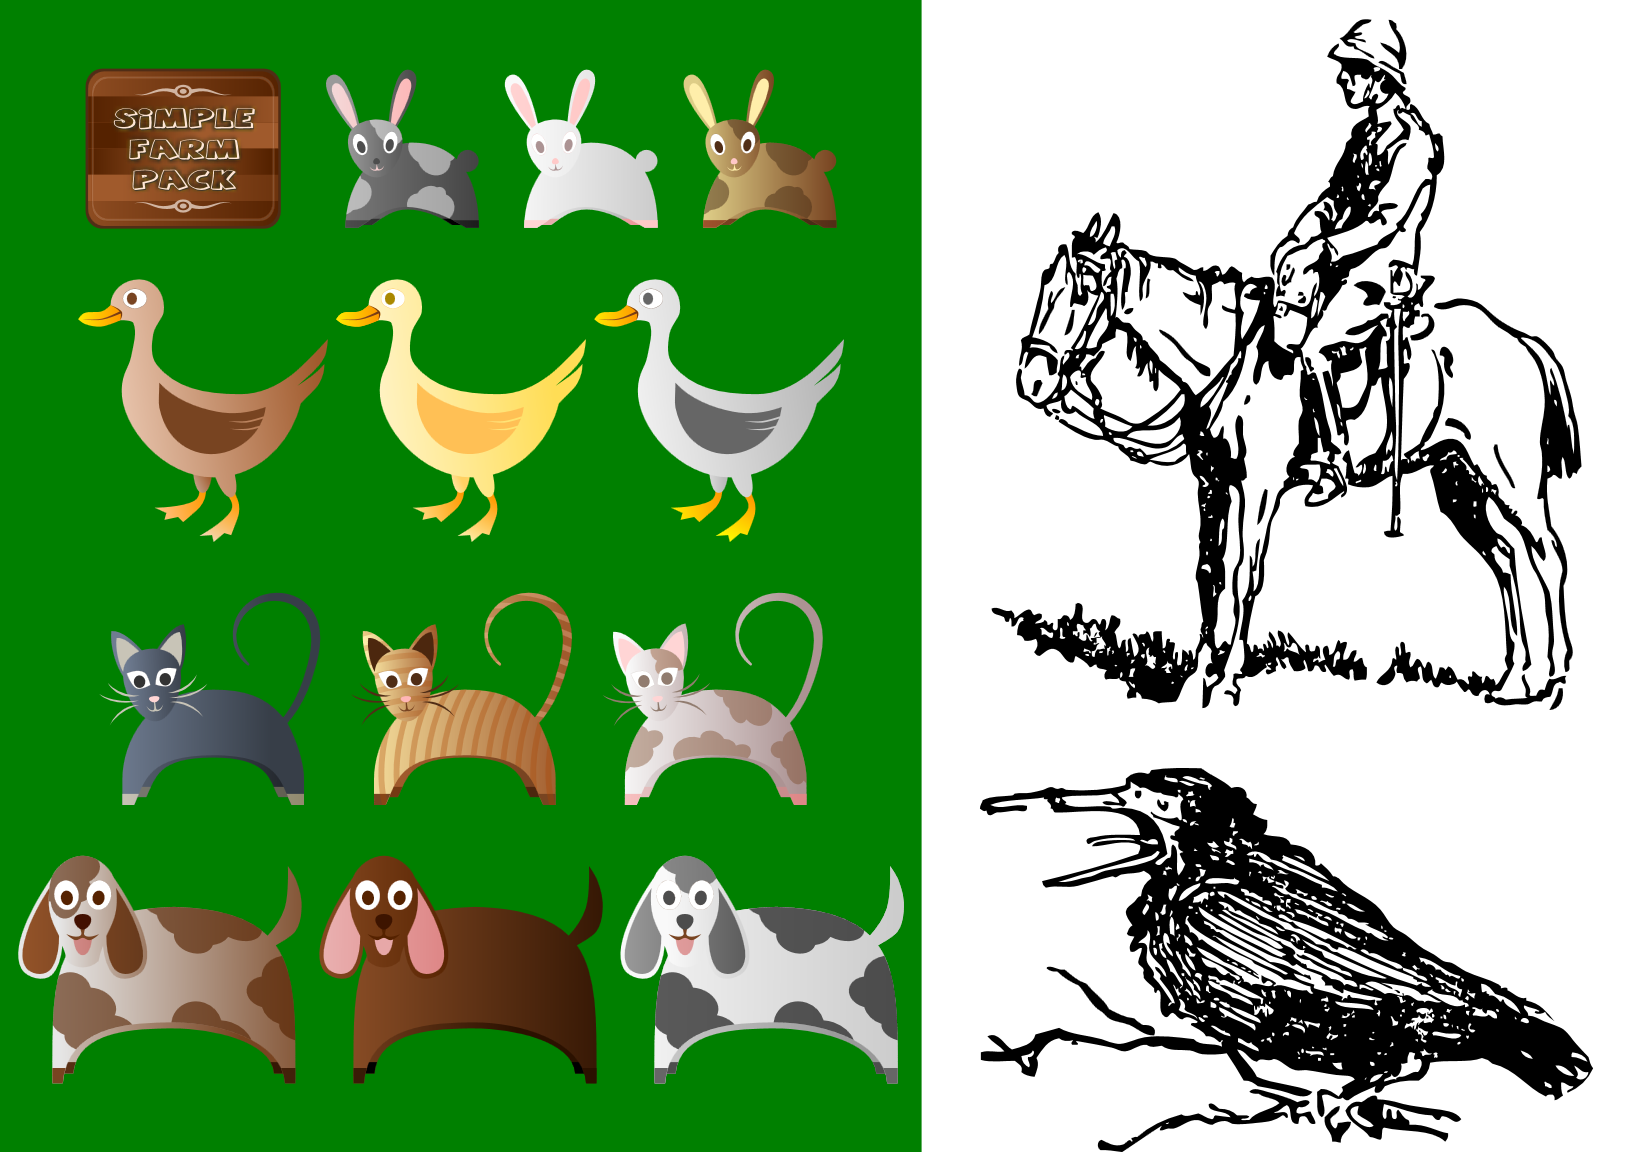 The farm animals are drawn in a very stylistic manner, with swooping curves and shiny gradients; each row has a different type of animal (rabbits, ducks, cats, and dogs) with three color variations.  The traces of Baden-Powell's drawings are black and white, with all the appearance of pen and ink drawings; the upper image is a soldier on a horse, the lower image is a black crow, beak open.